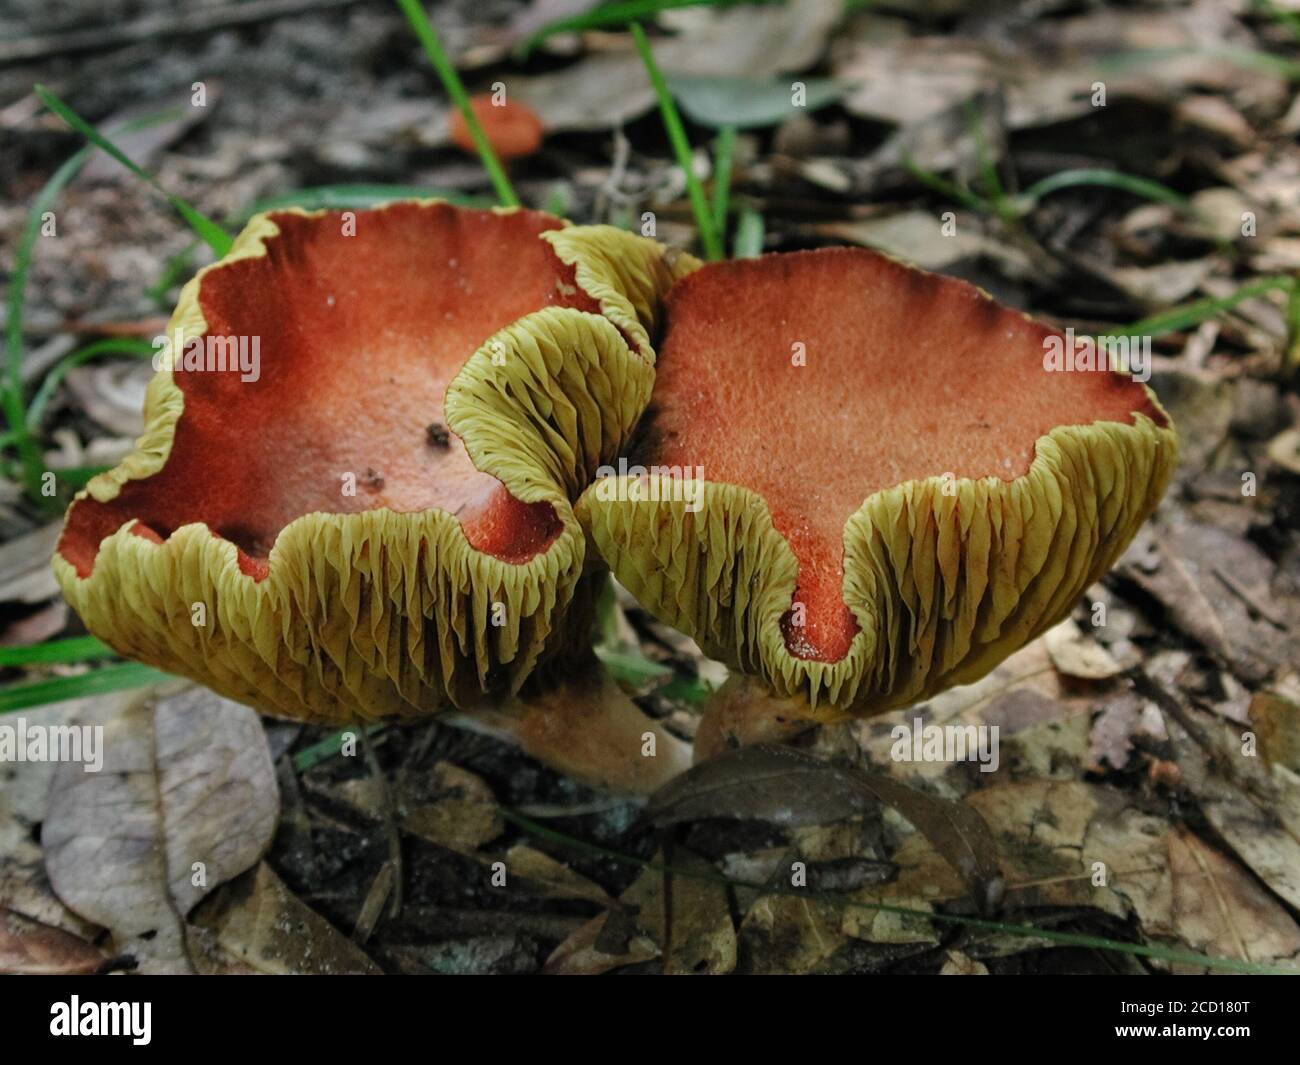 Mushrooms are a form of fungi found in natural settings around the world.; This one is found in a forested area of North Central Florida.. Stock Photo